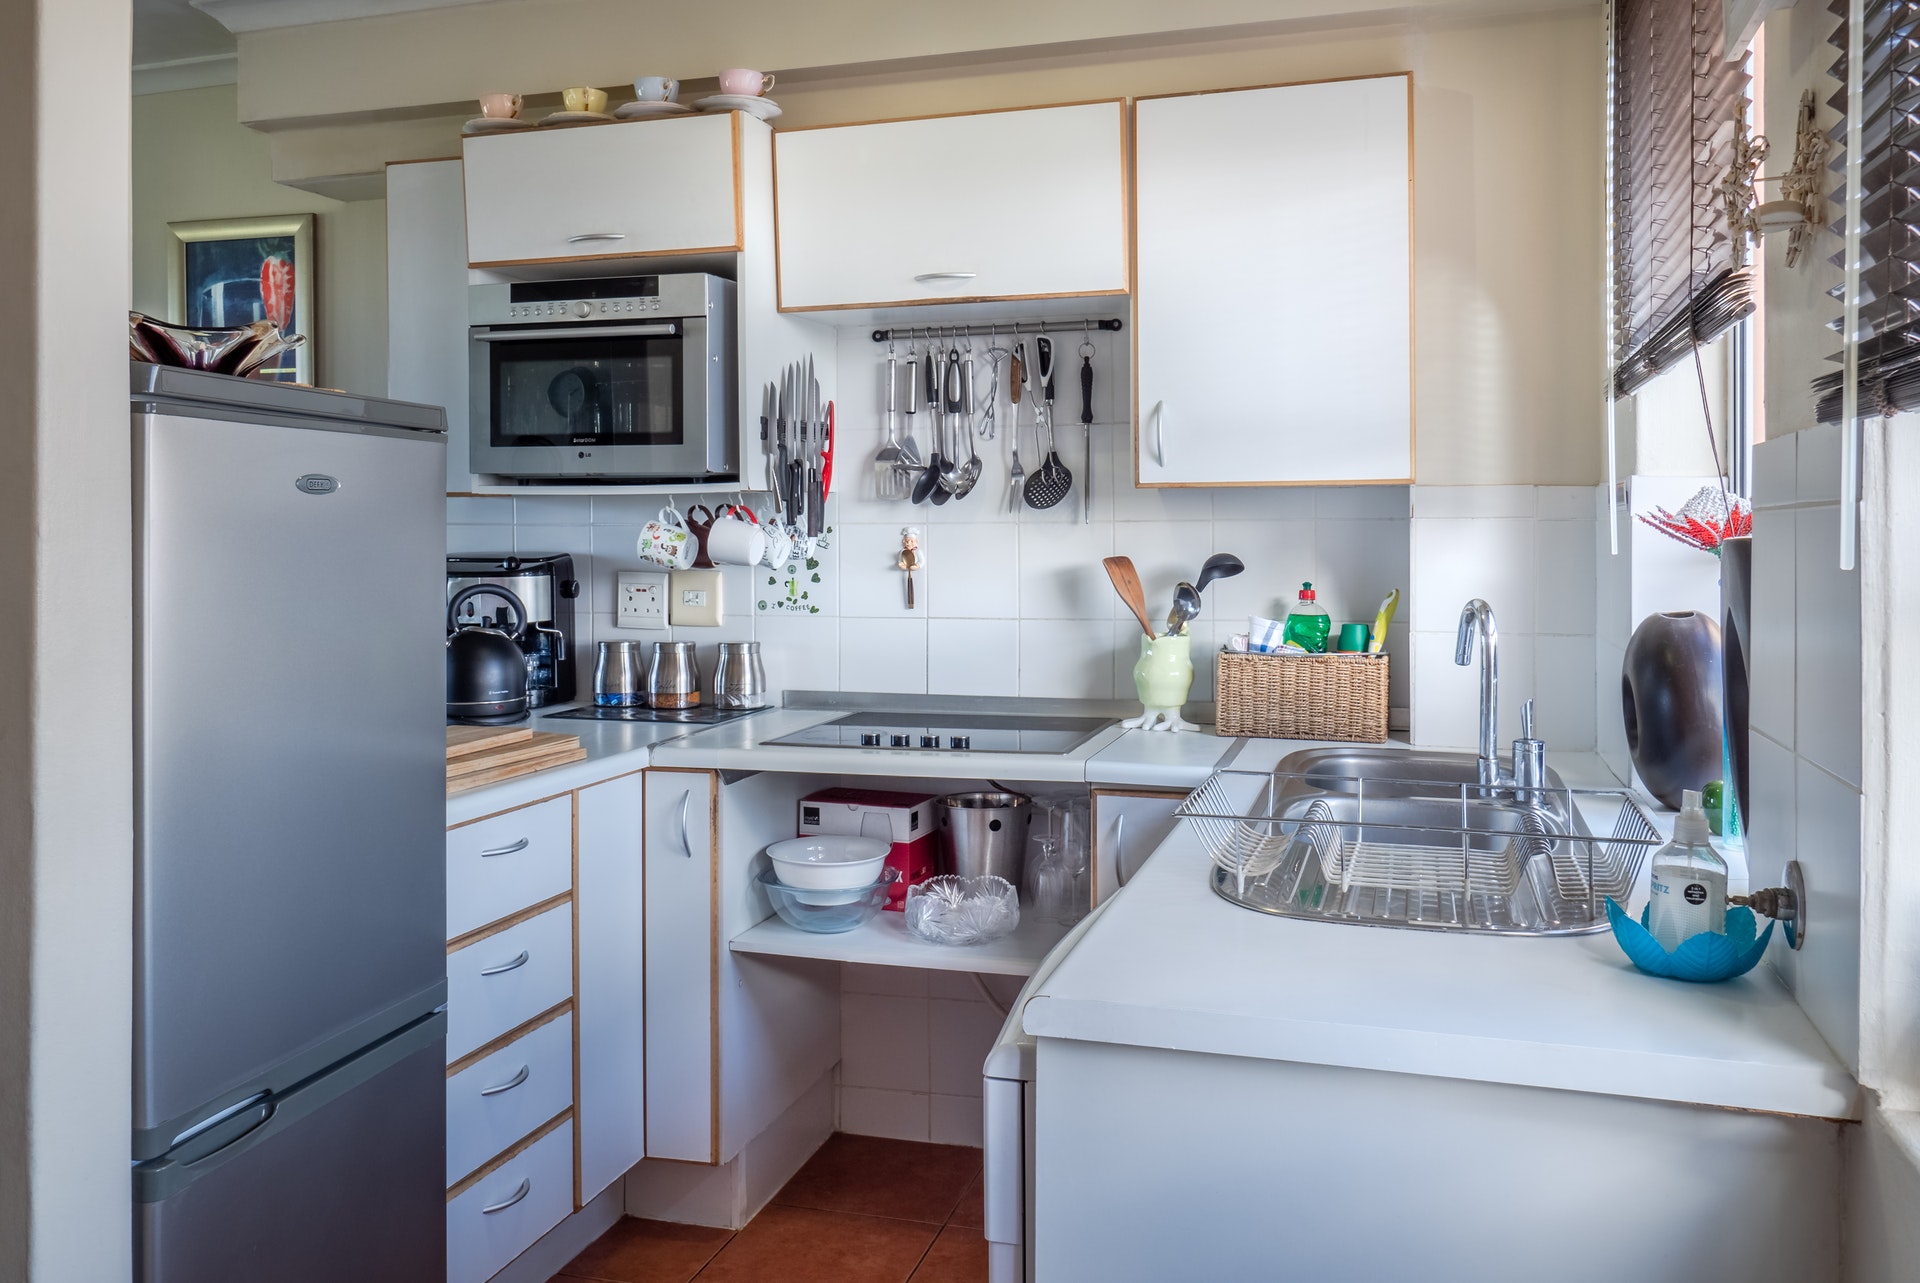 Top Space Saving Hacks For Your Kitchen